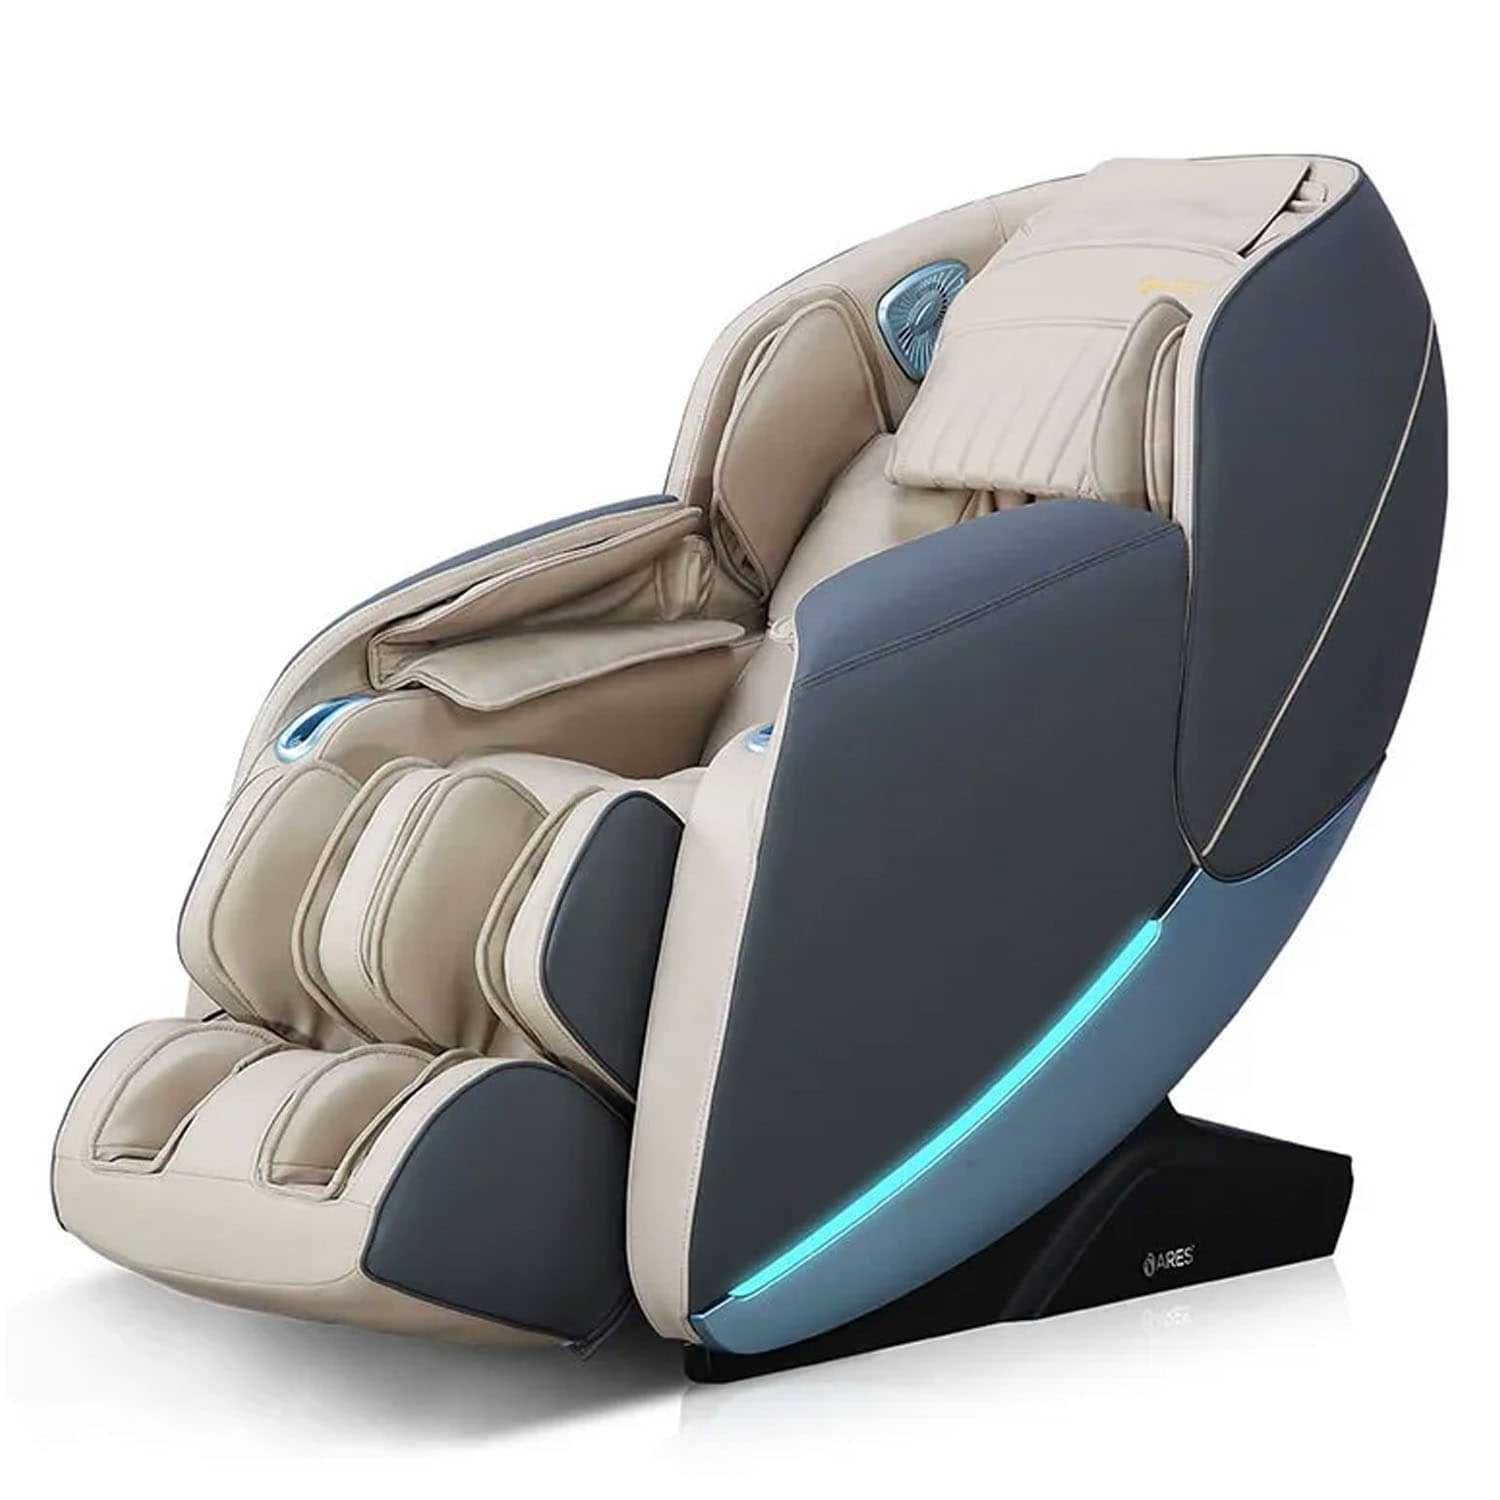 Fully Automatic “ARES” Massage Chair With Voice control!!!